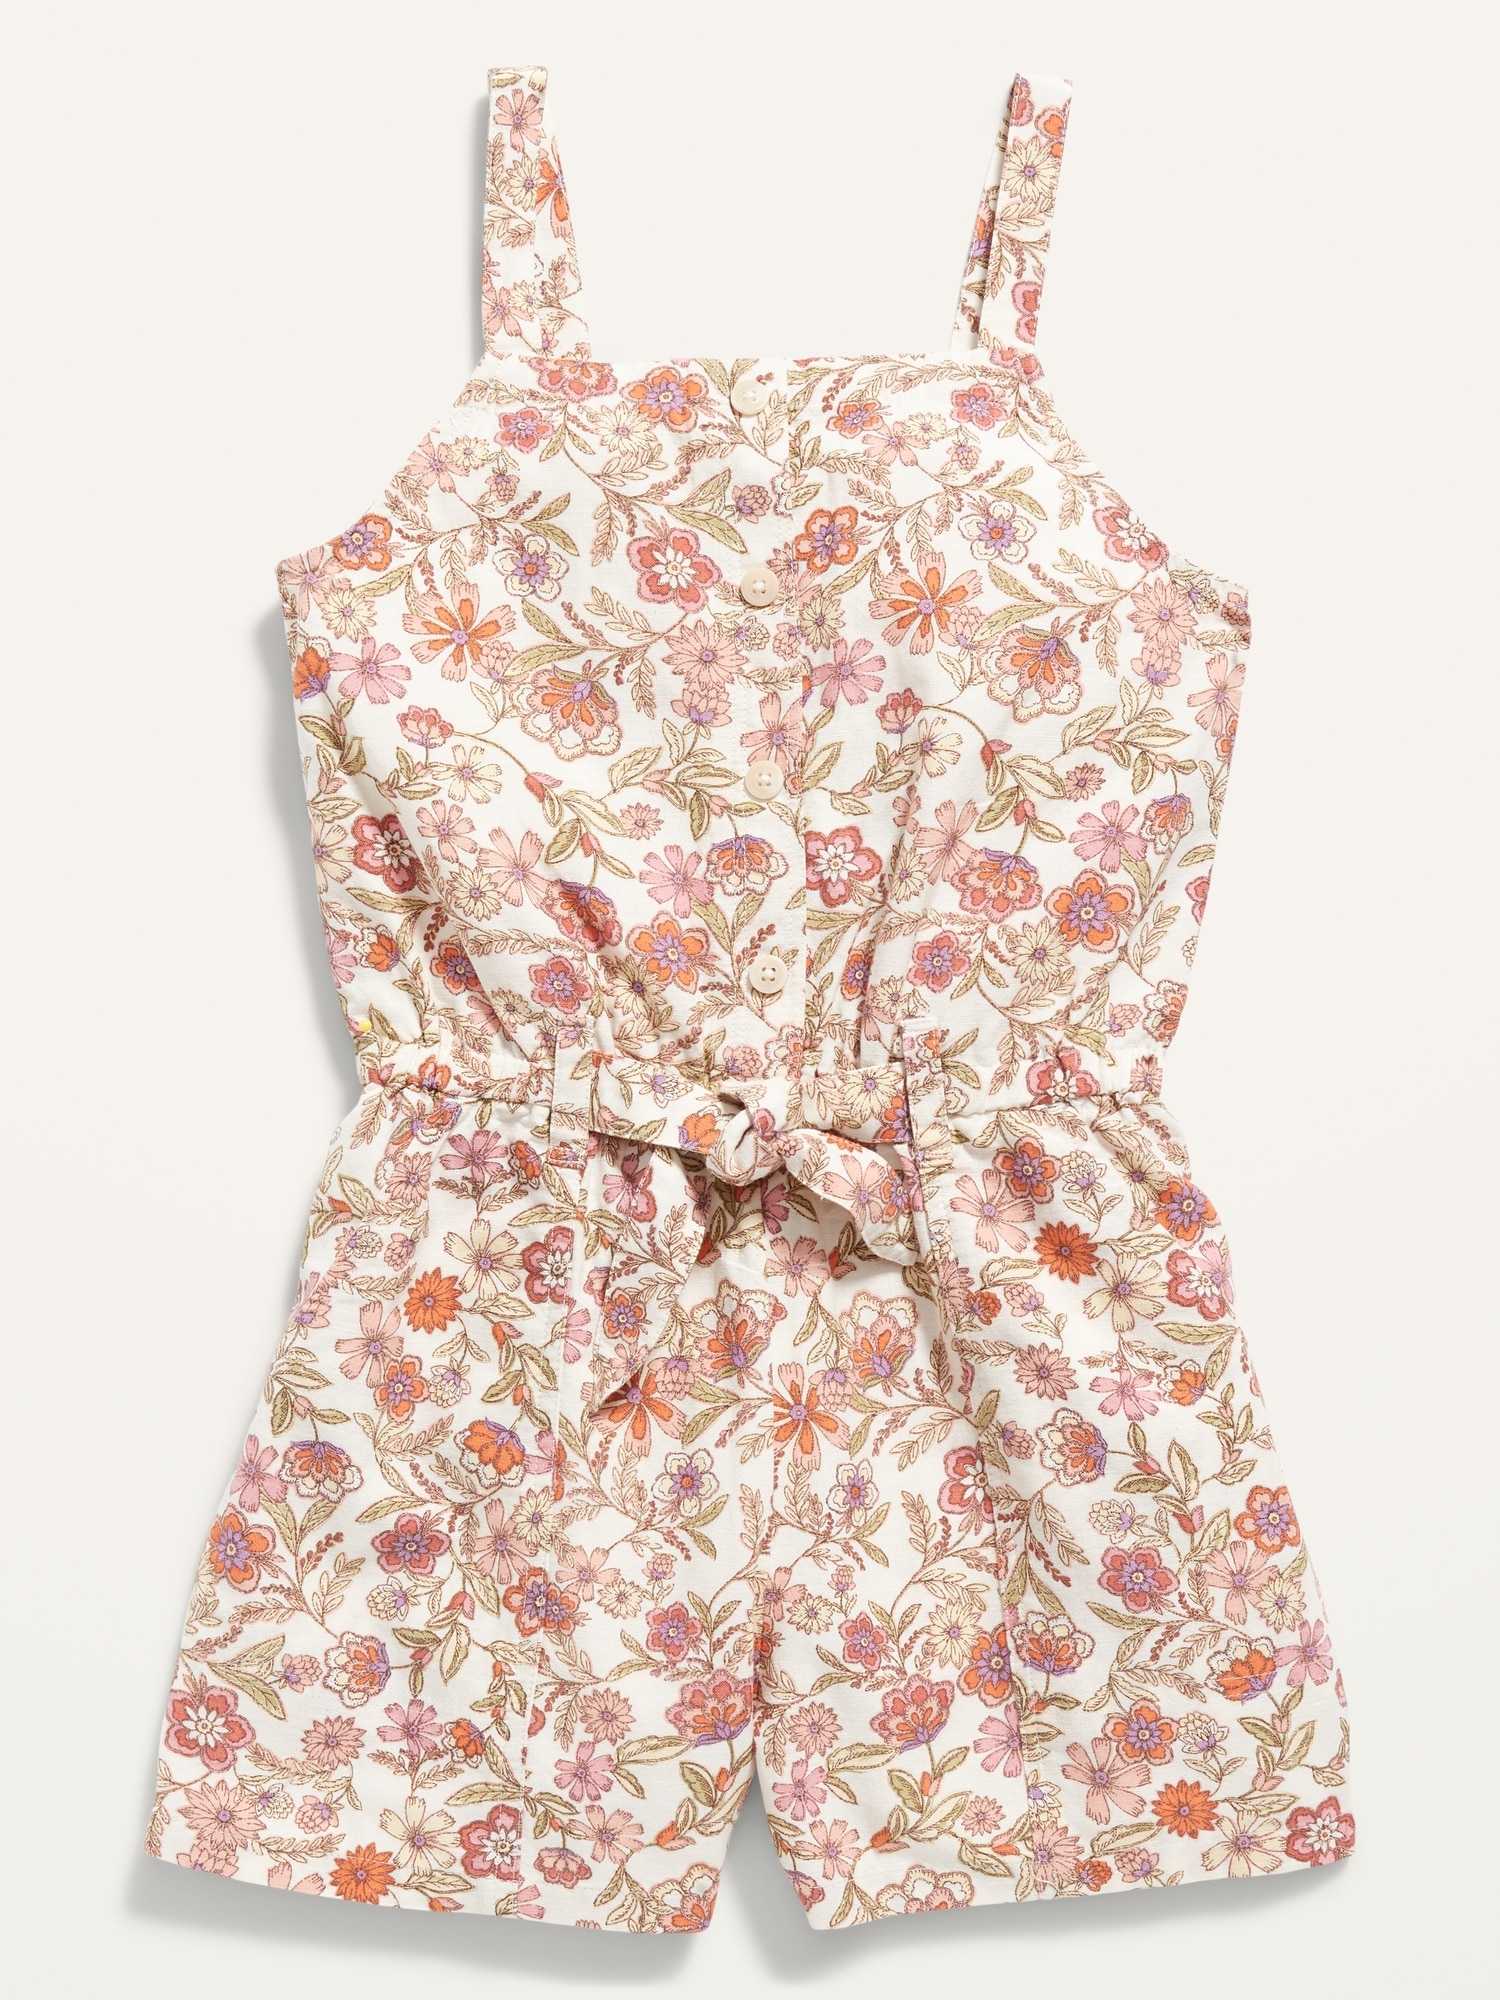 Navy Floral Button Front Romper